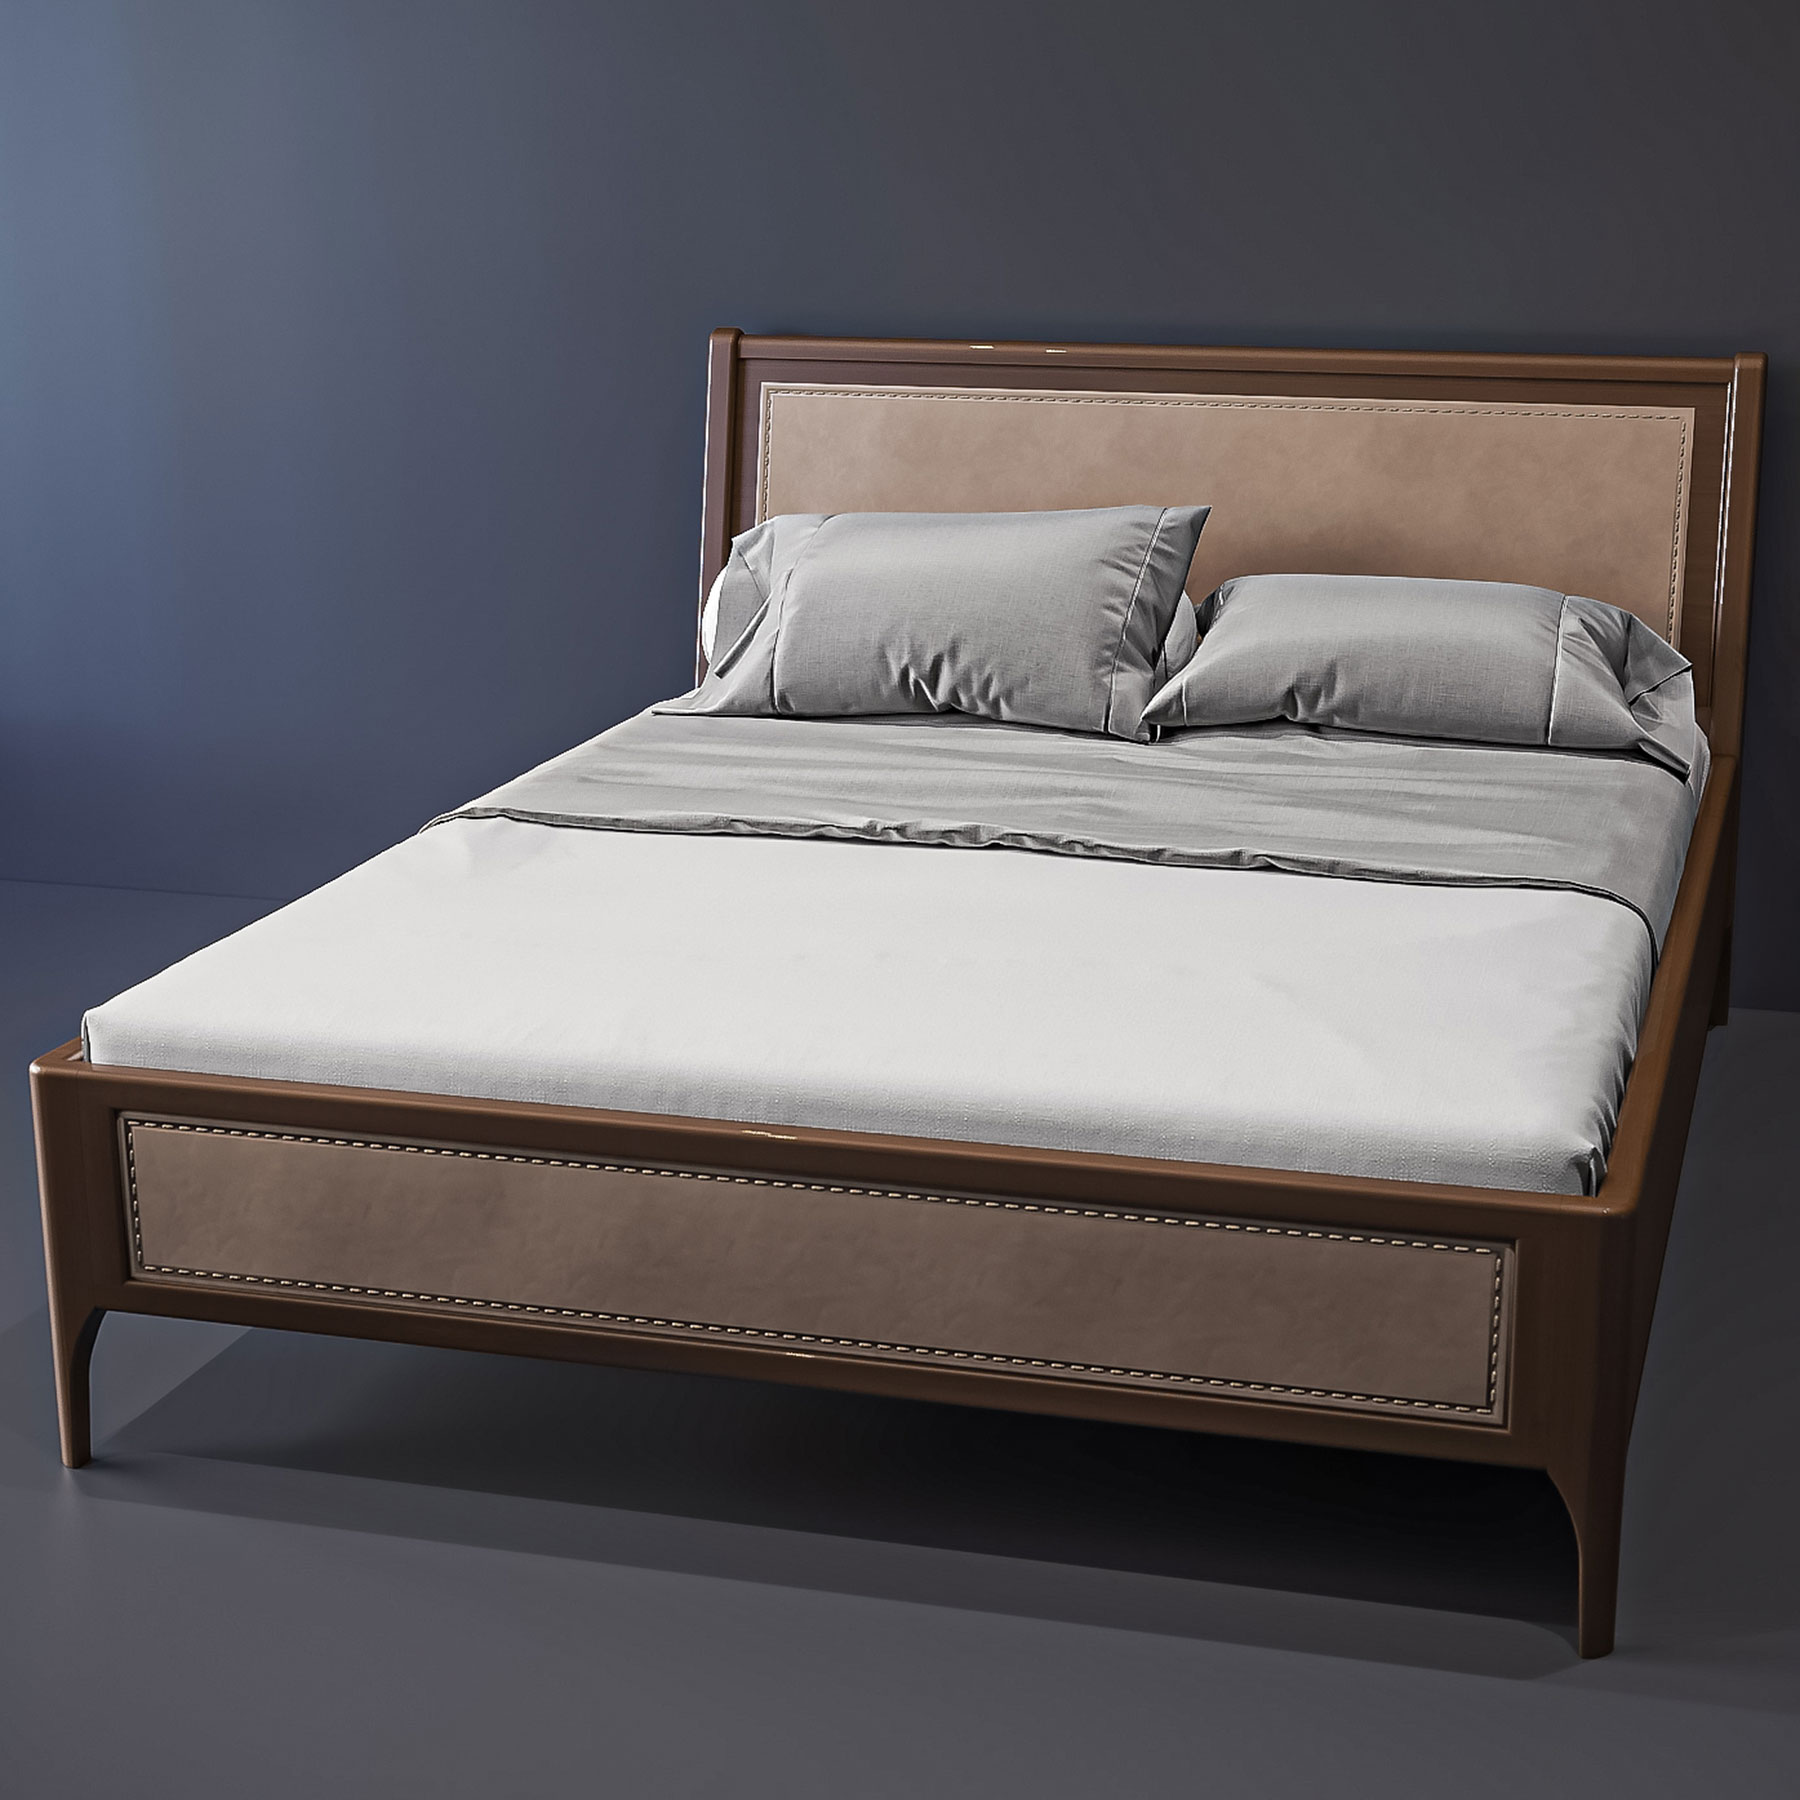 Double bed from Audrey collection 2